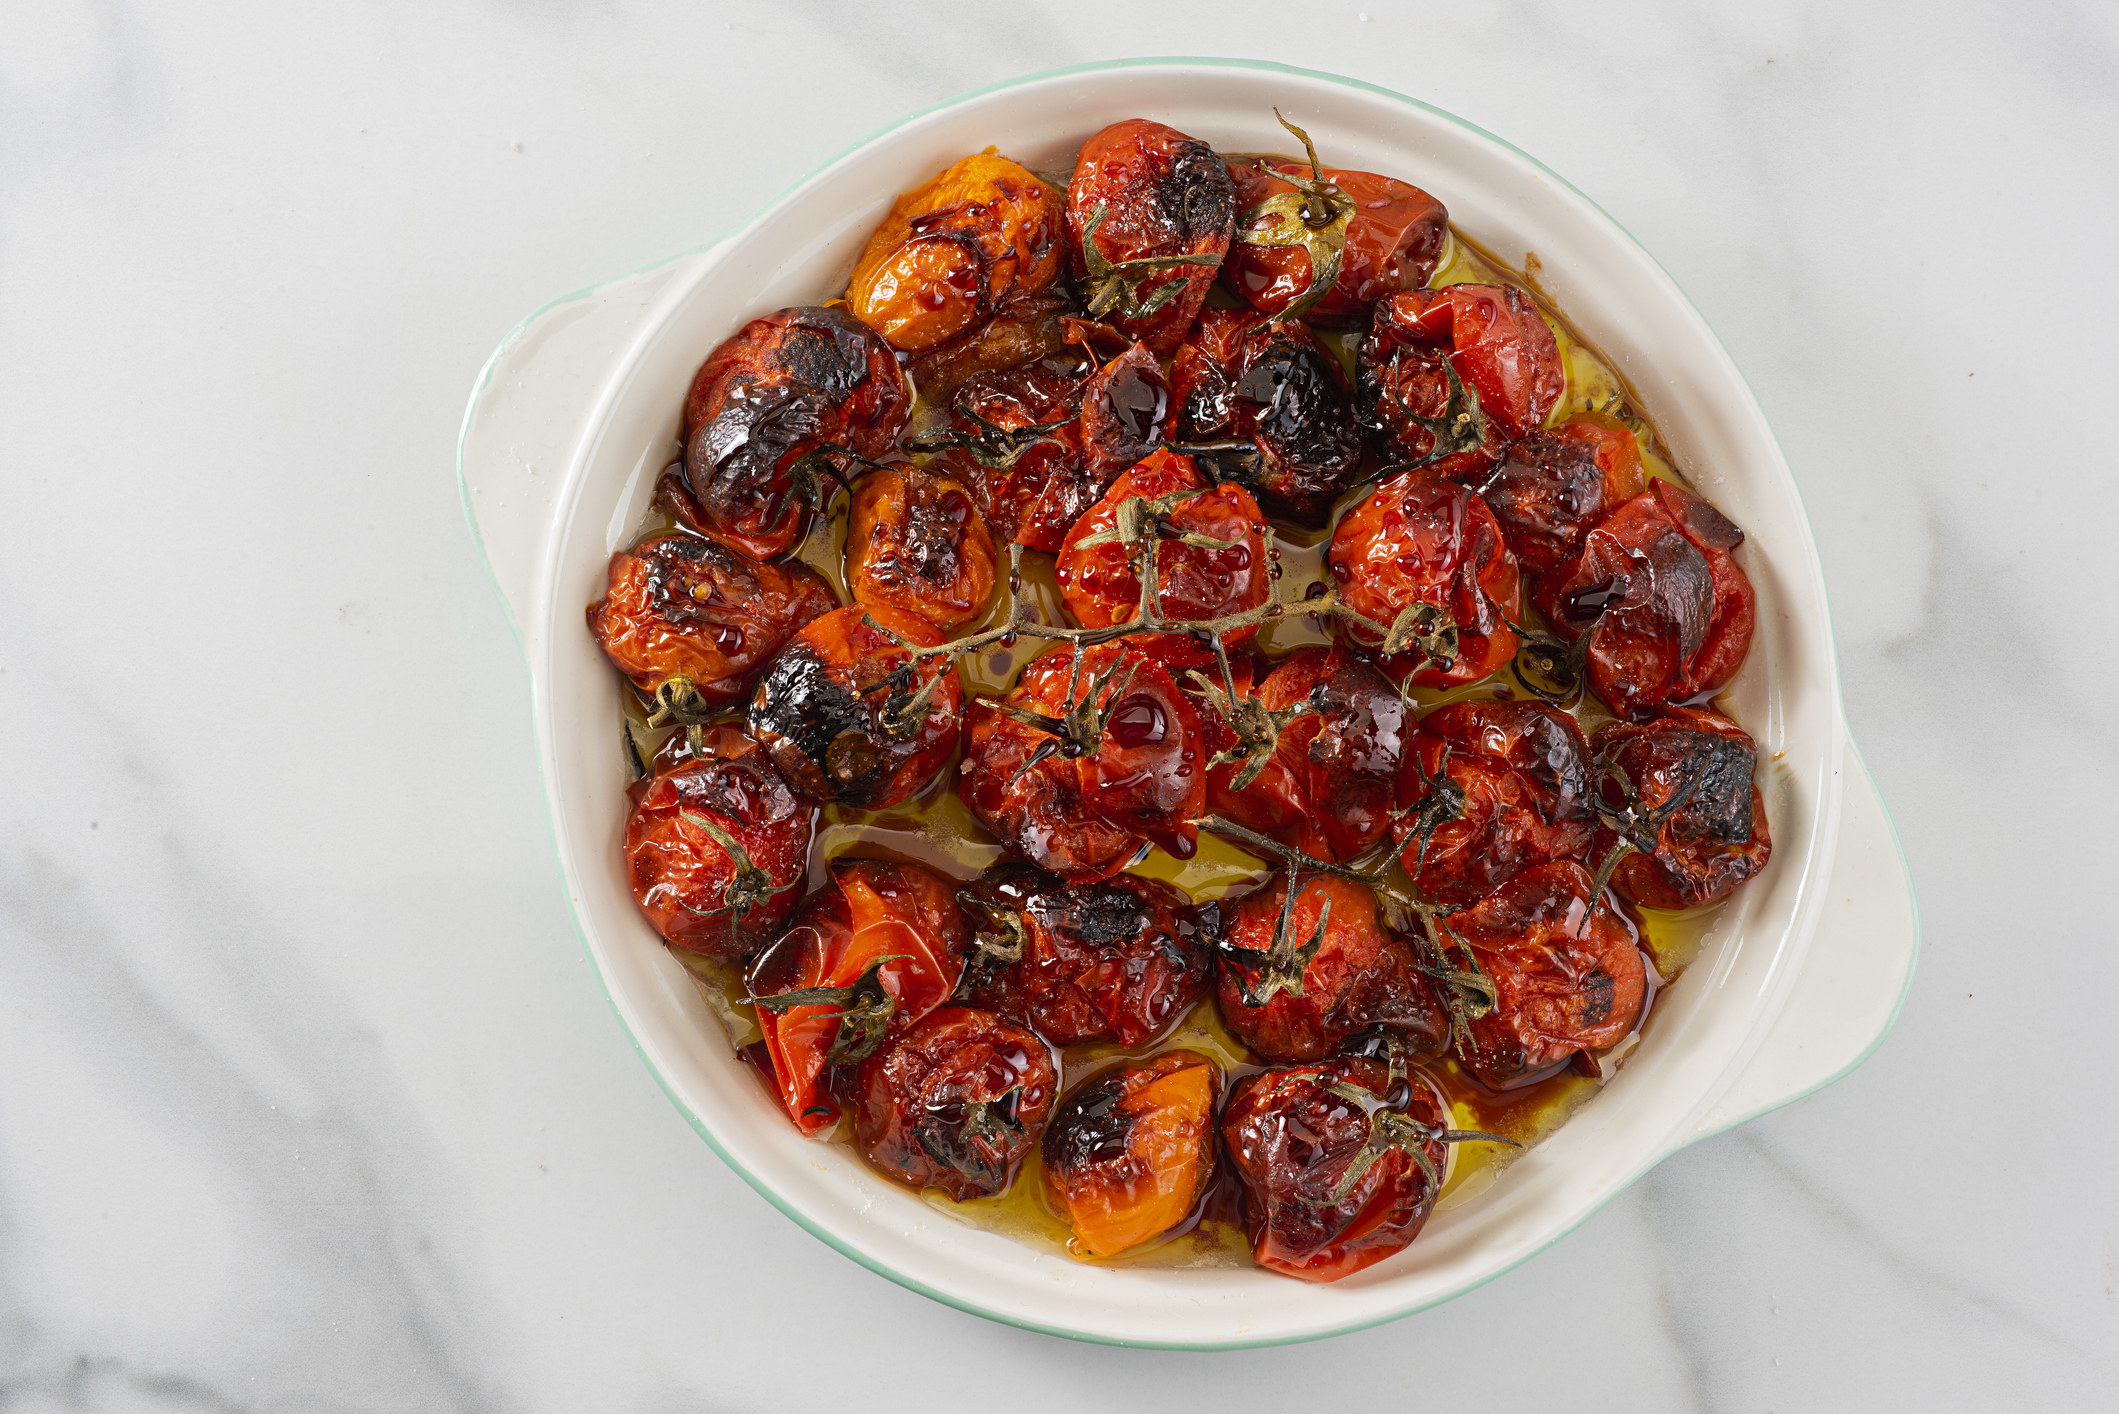 Blistered cherry tomatoes in olive oil.